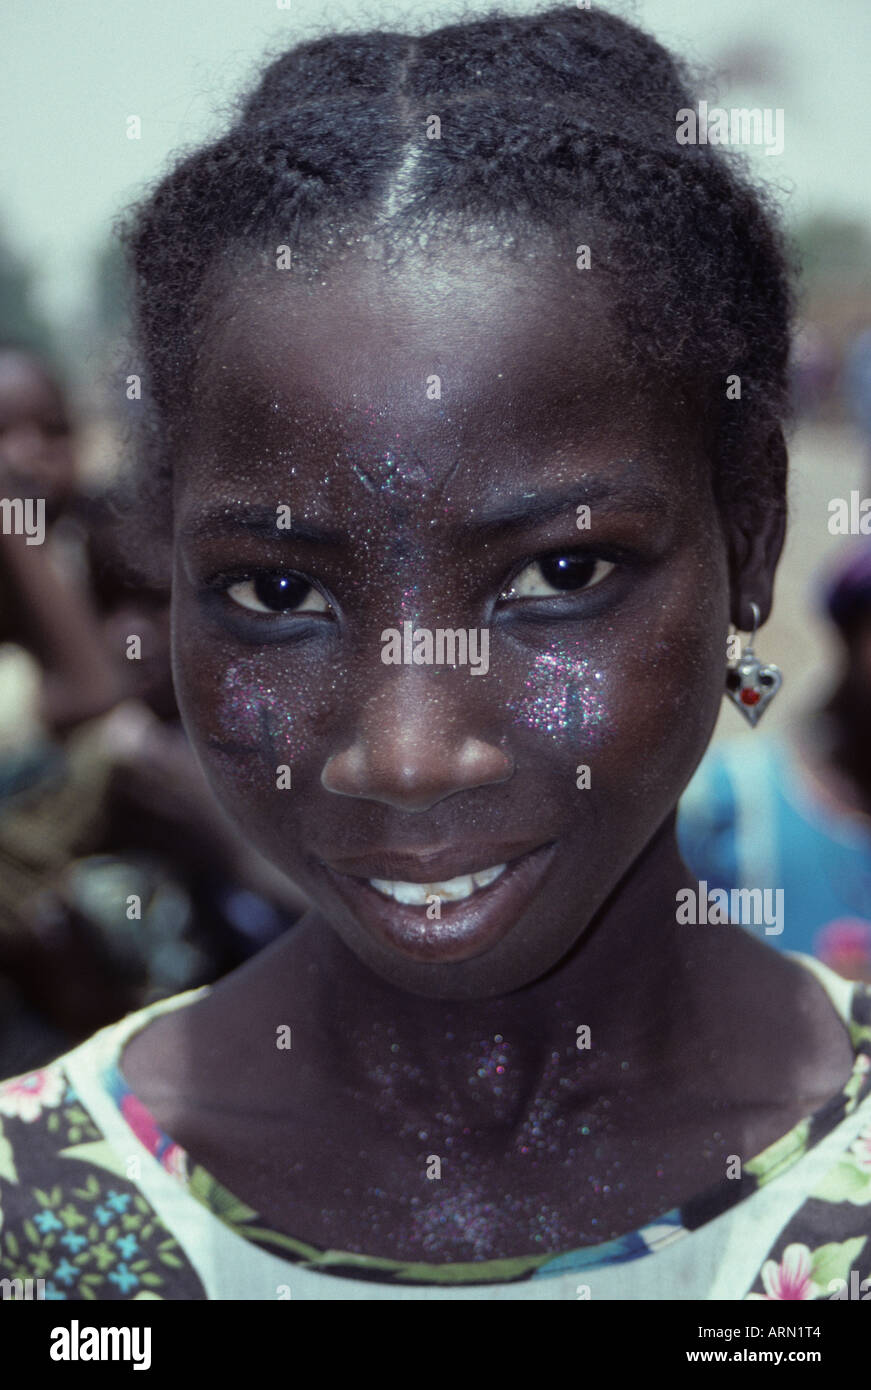 Bonkoukou, Niger, Africa. Nigerien Girl with Sprinkles or Glitter on Face, plus Facial Tattoos, Scarification. Stock Photo